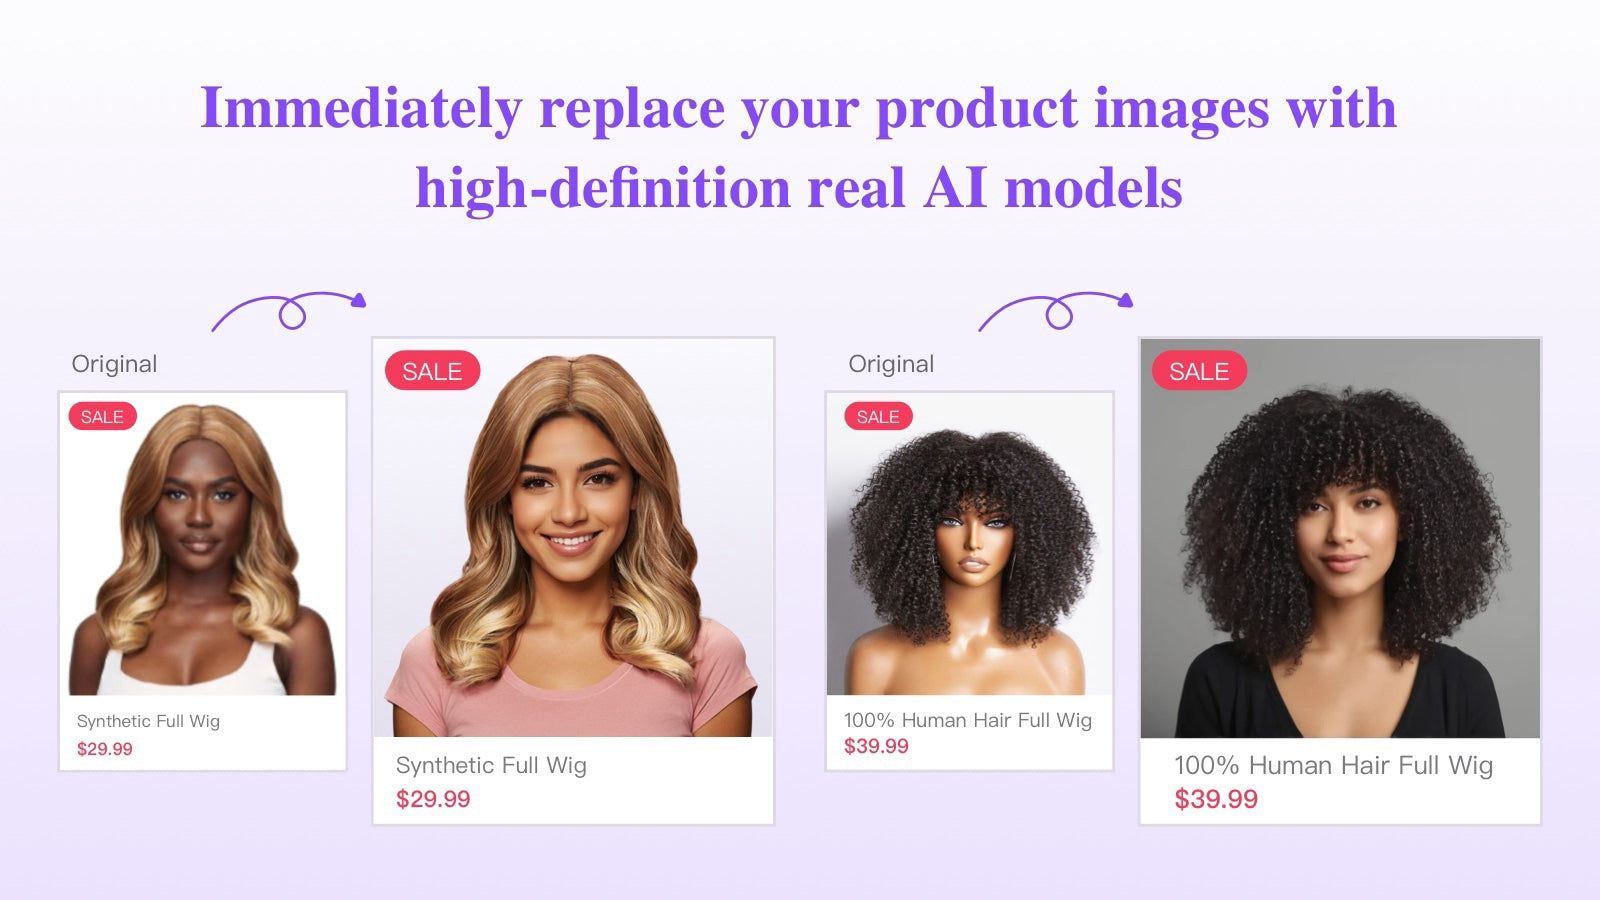 Replace product images with AI model images